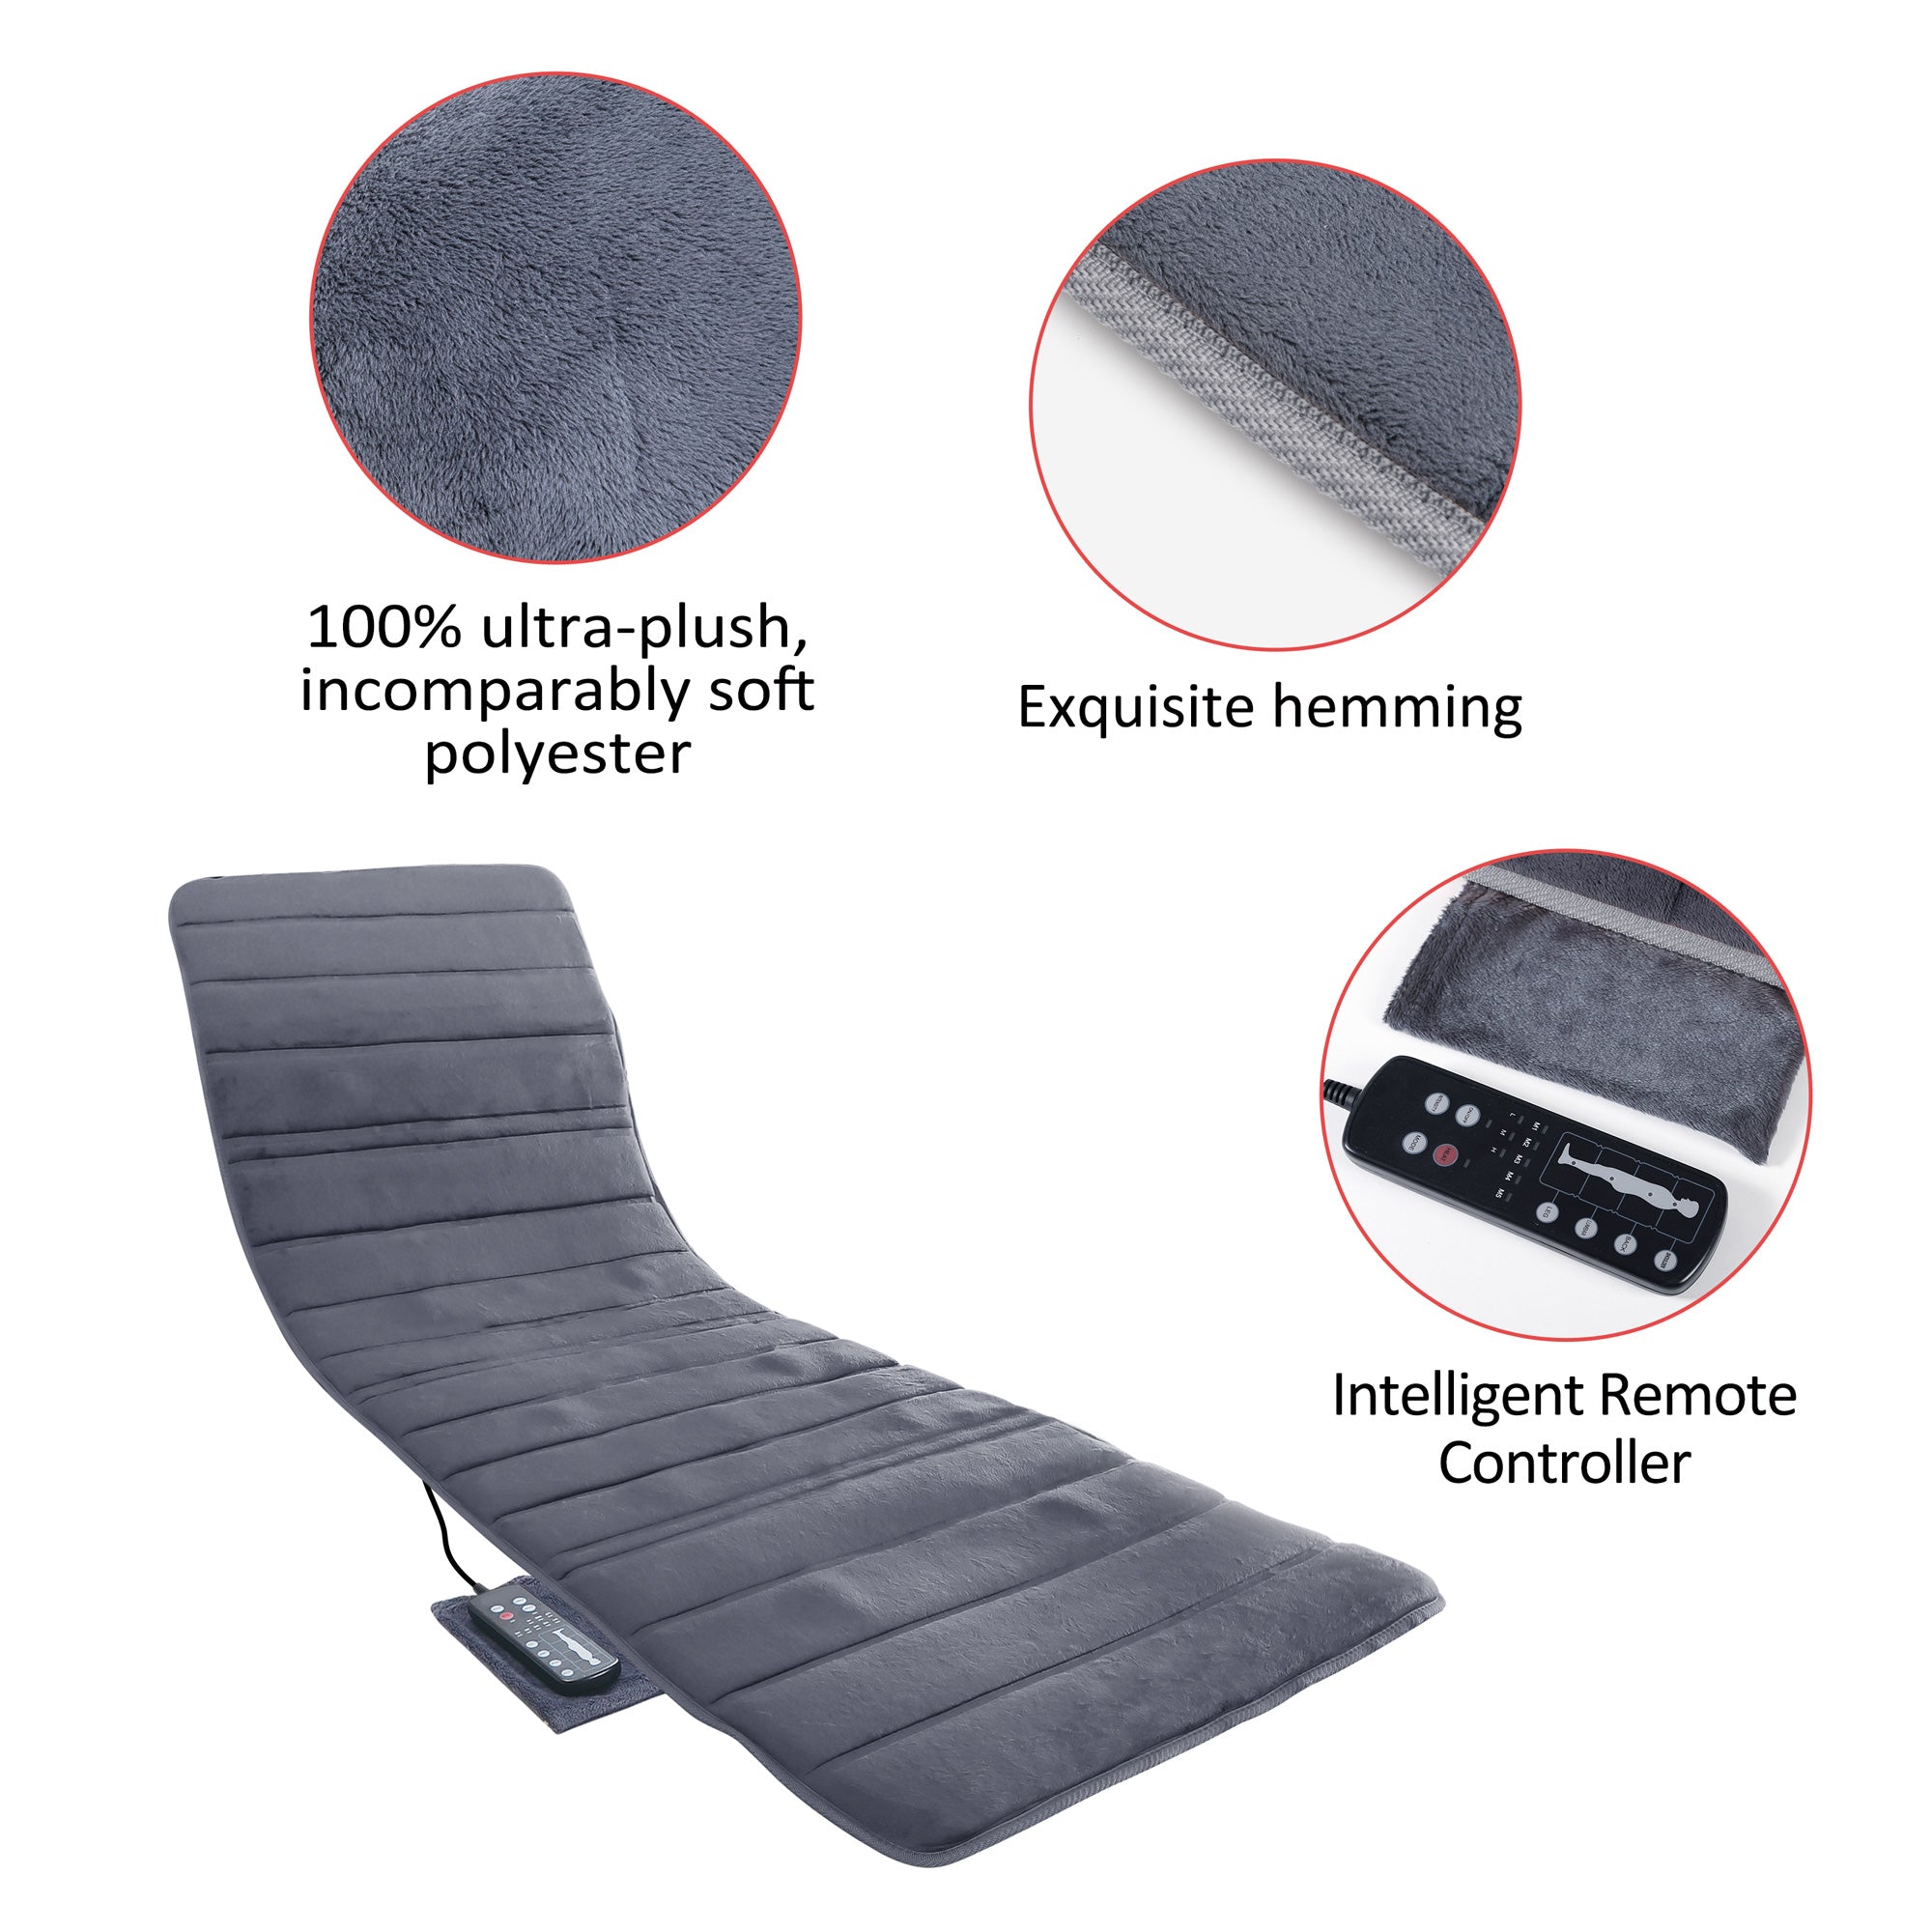 Comfier Full Body Massage Mat With Heat And Vibration Motors And 2 Therapy